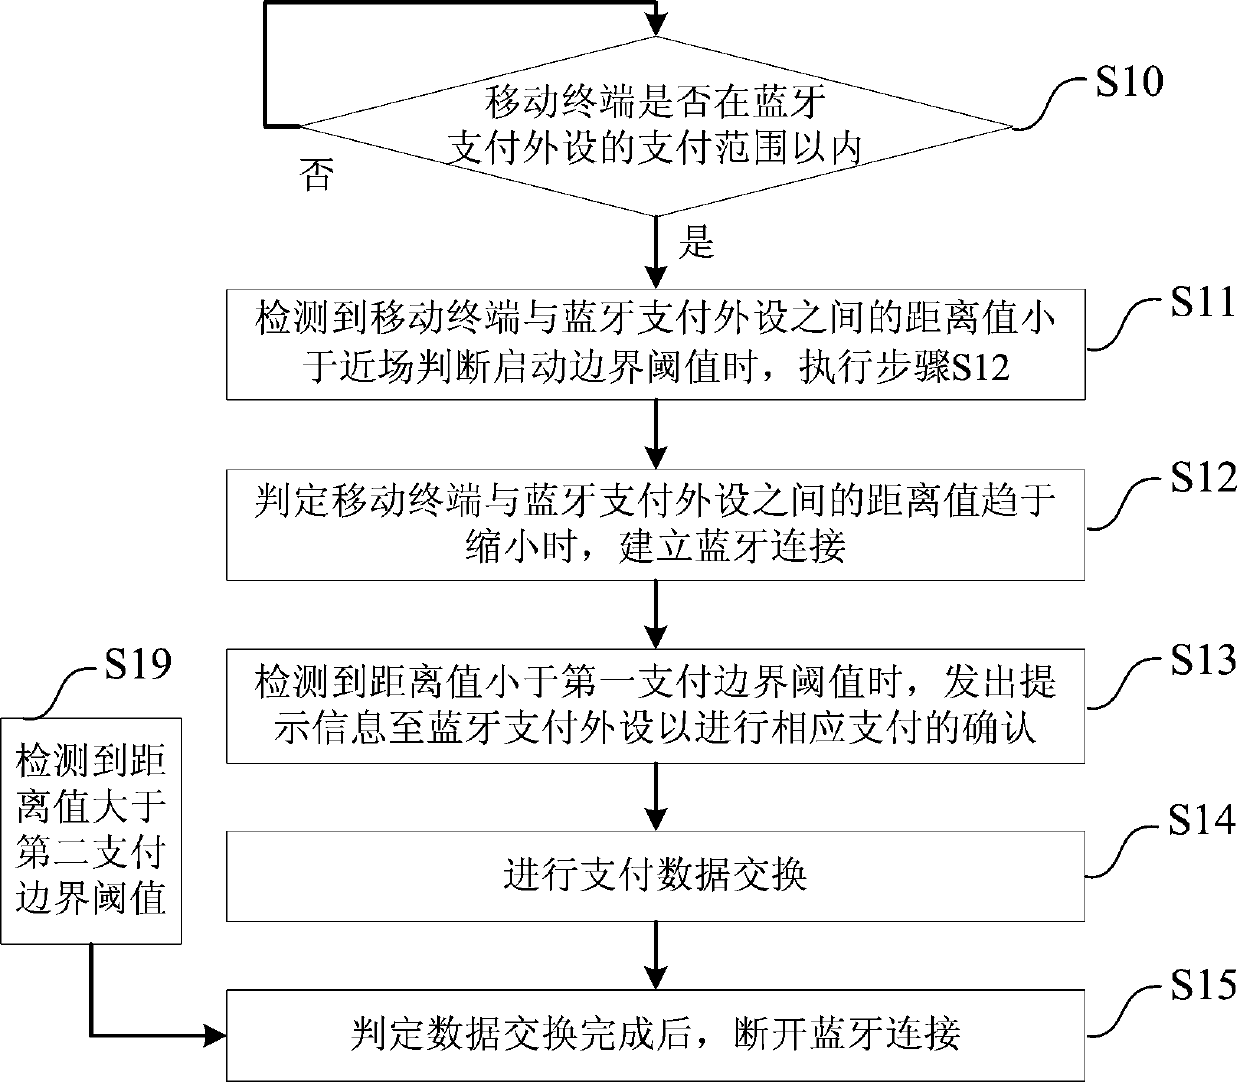 Near field payment connection and data exchange method and system